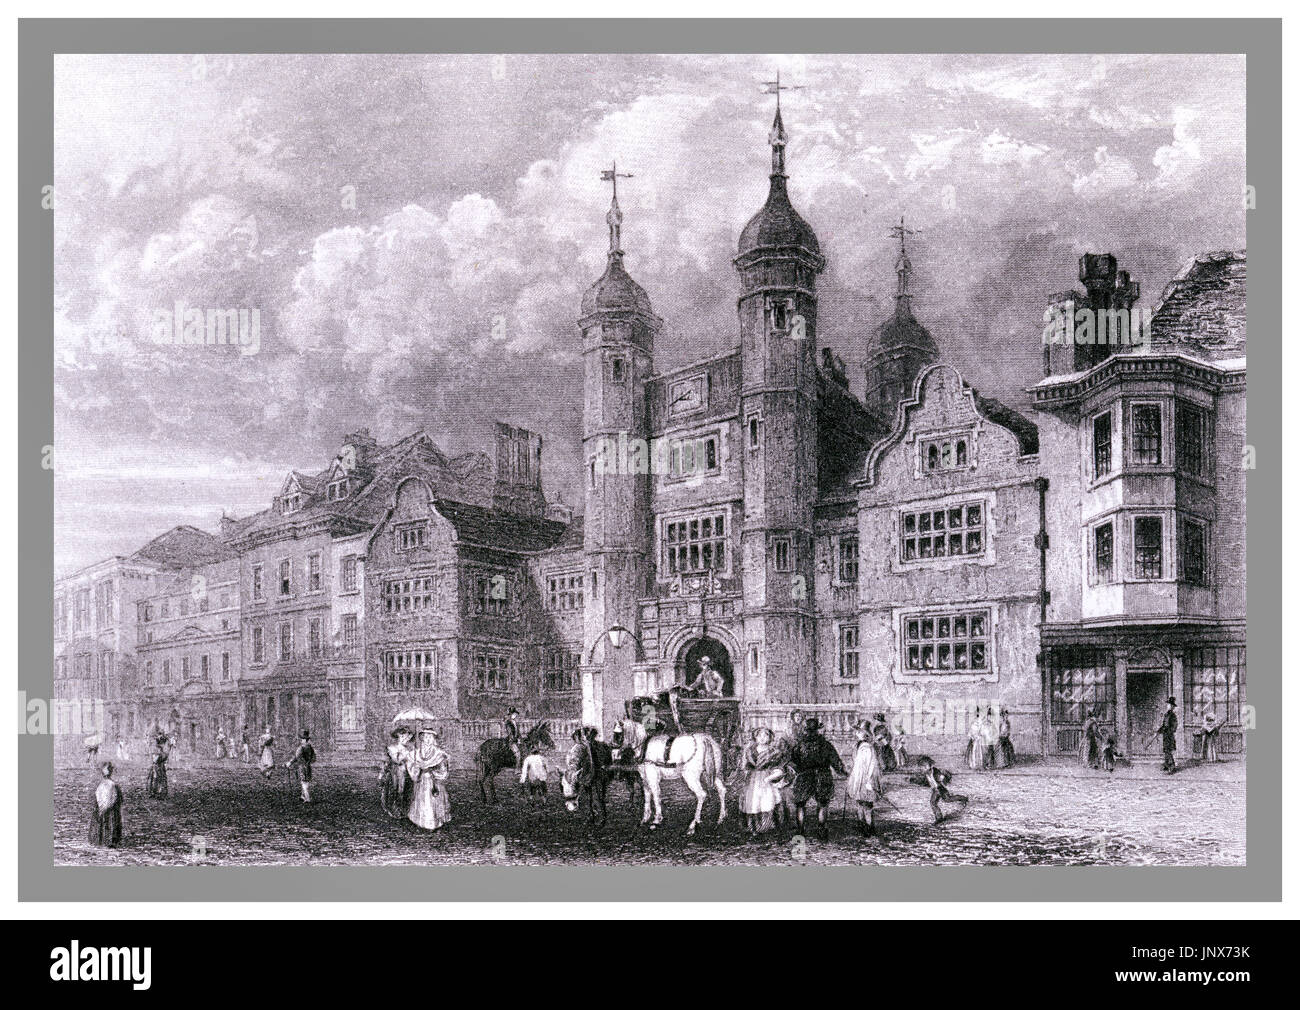 Vintage 1800's illustration Abbot's Hospital a Jacobean alms house High Street Guildford, Surrey, England Stock Photo